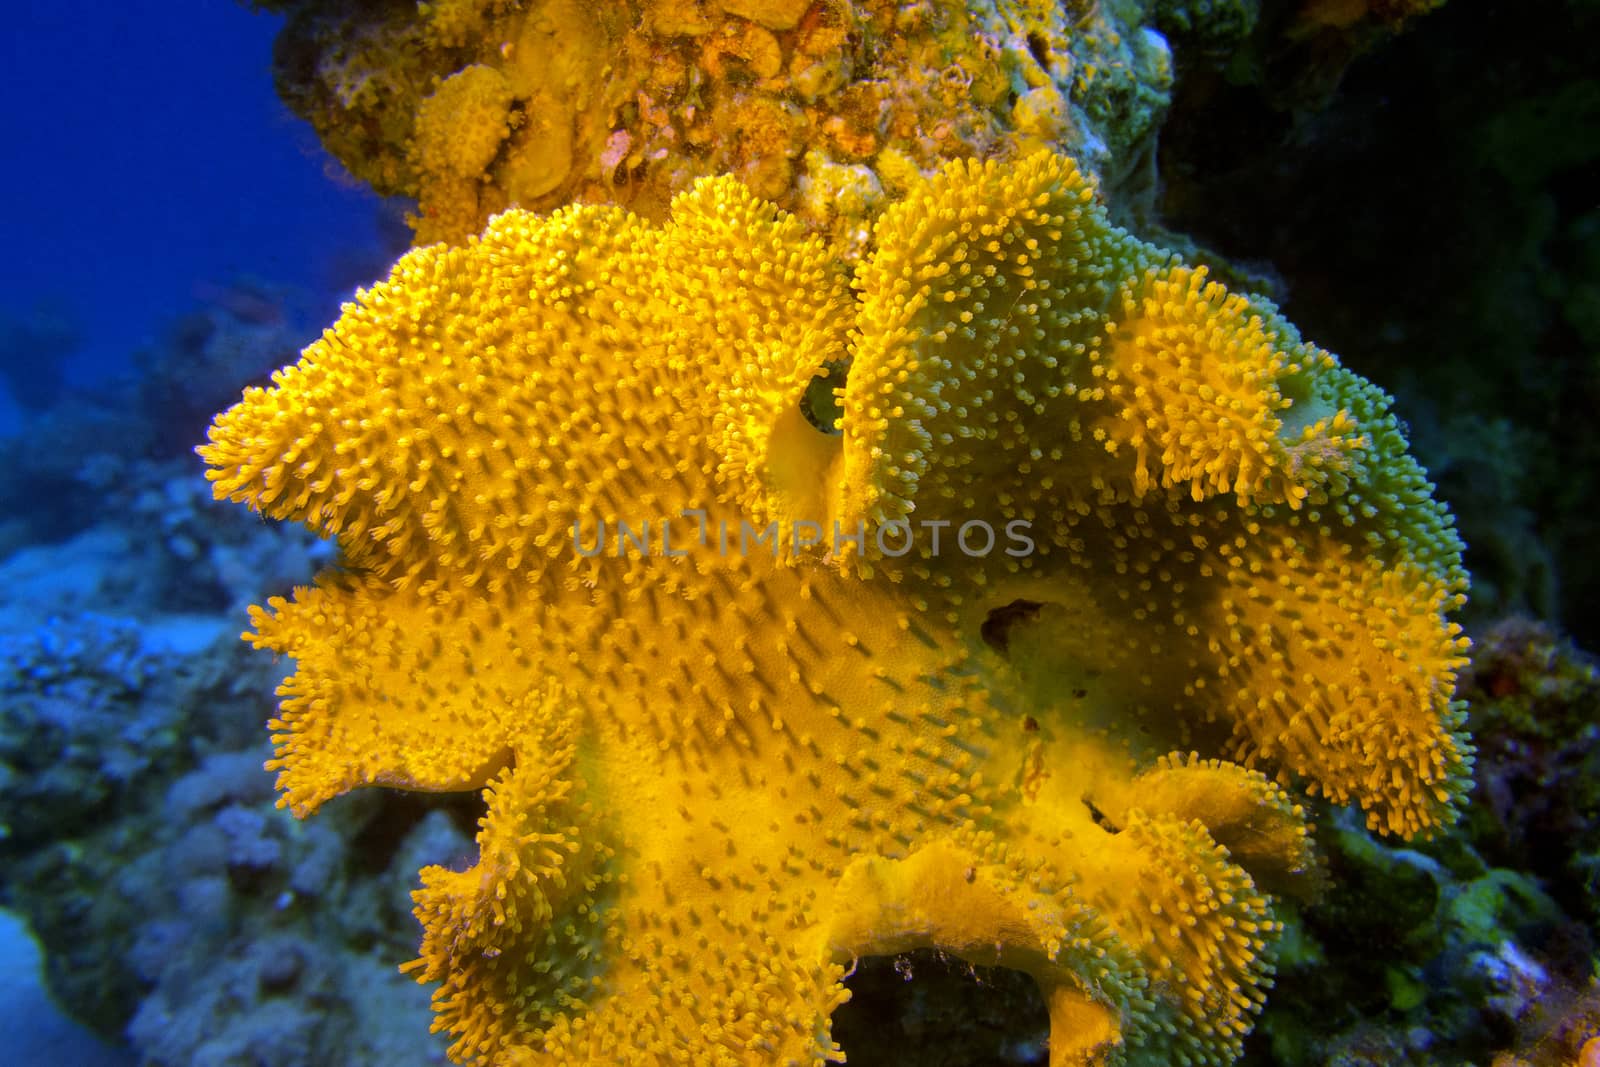  mushroom leather coral in tropical sea, underwater by mychadre77